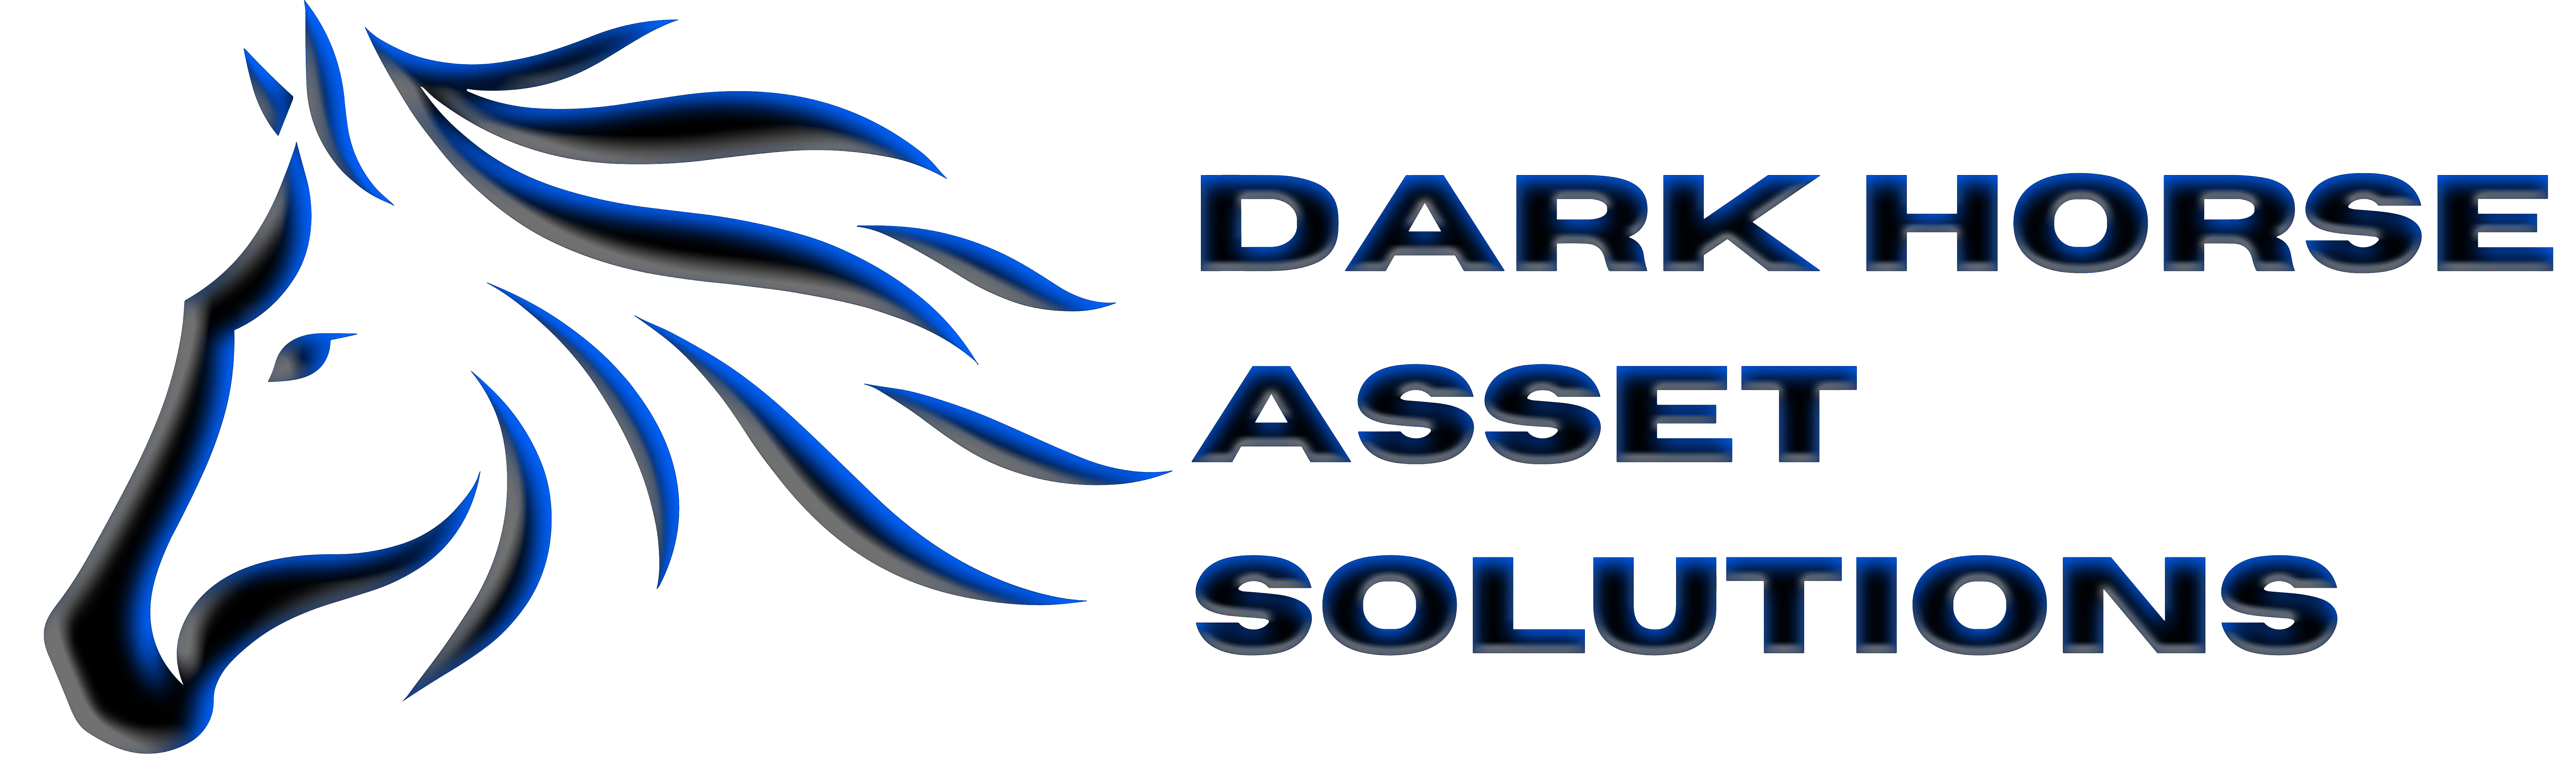 Dark Horse Asset Solutions logo - A silhouette of a strong and confident dark horse, symbolizing resilience and success in real estate investing and redevelopment.